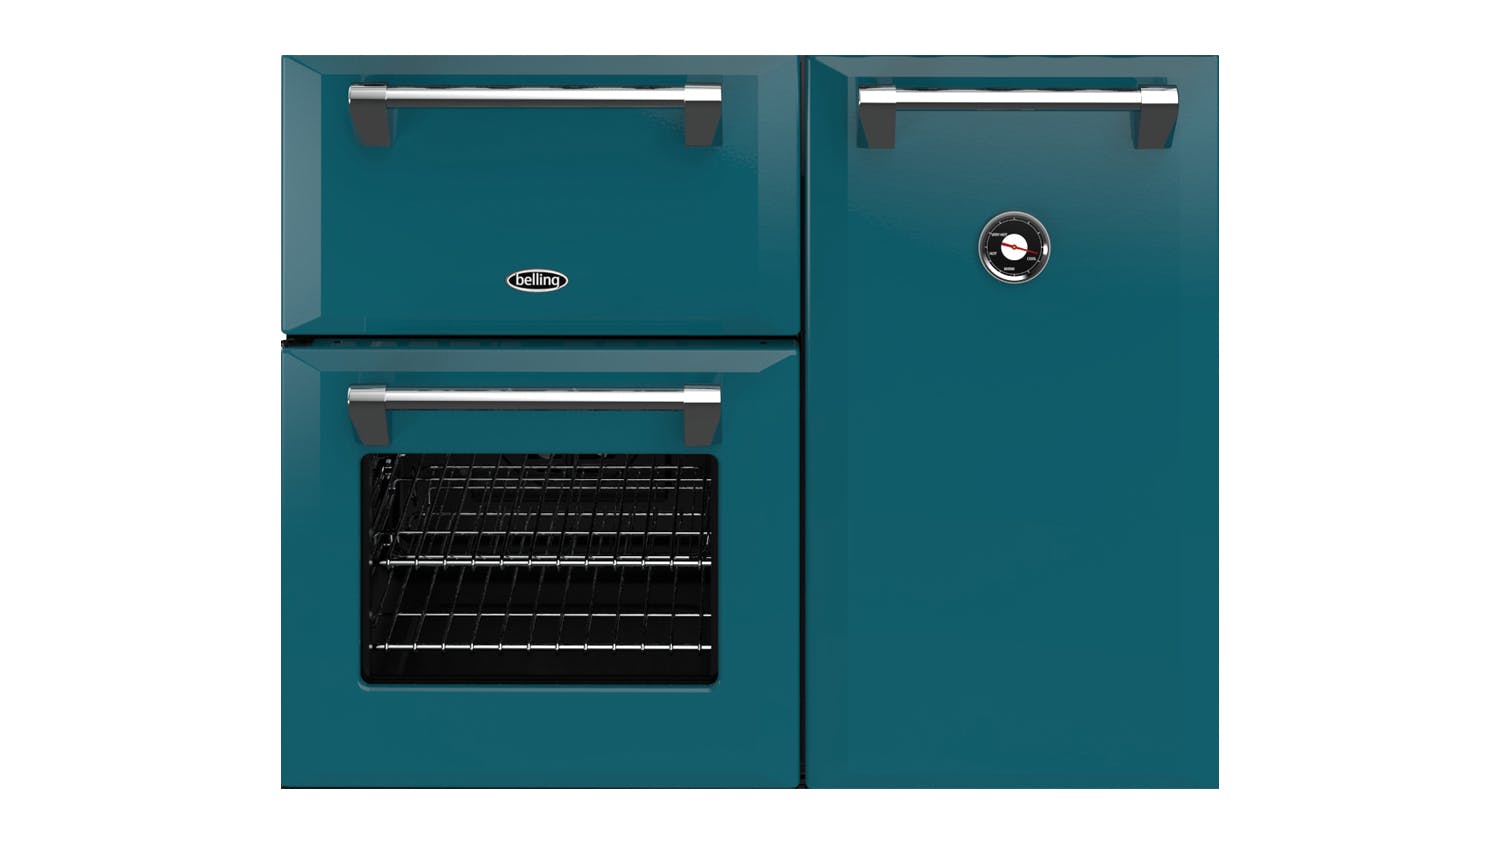 Belling 90cm Freestanding Oven with Induction Cooktop - Kingfisher Teal (Colour Boutique/BRD900IKT)